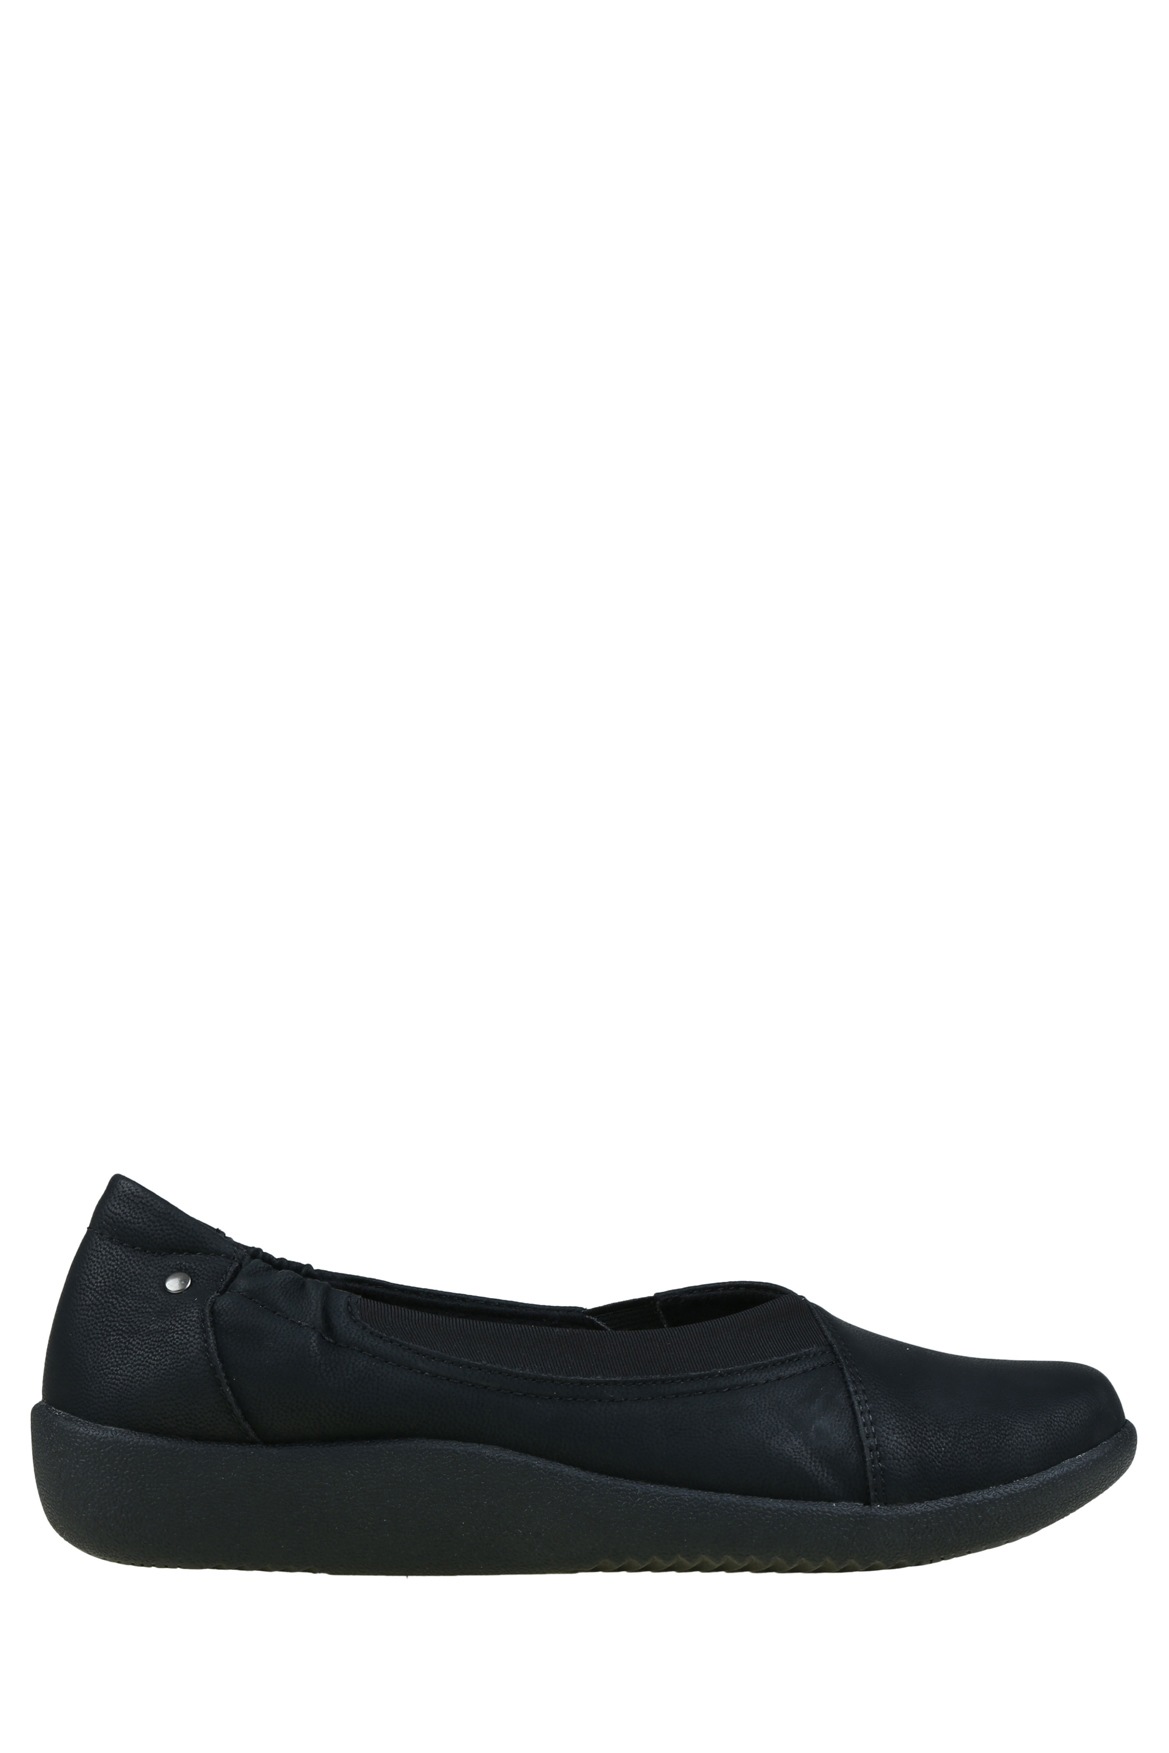 myer mens business shoes